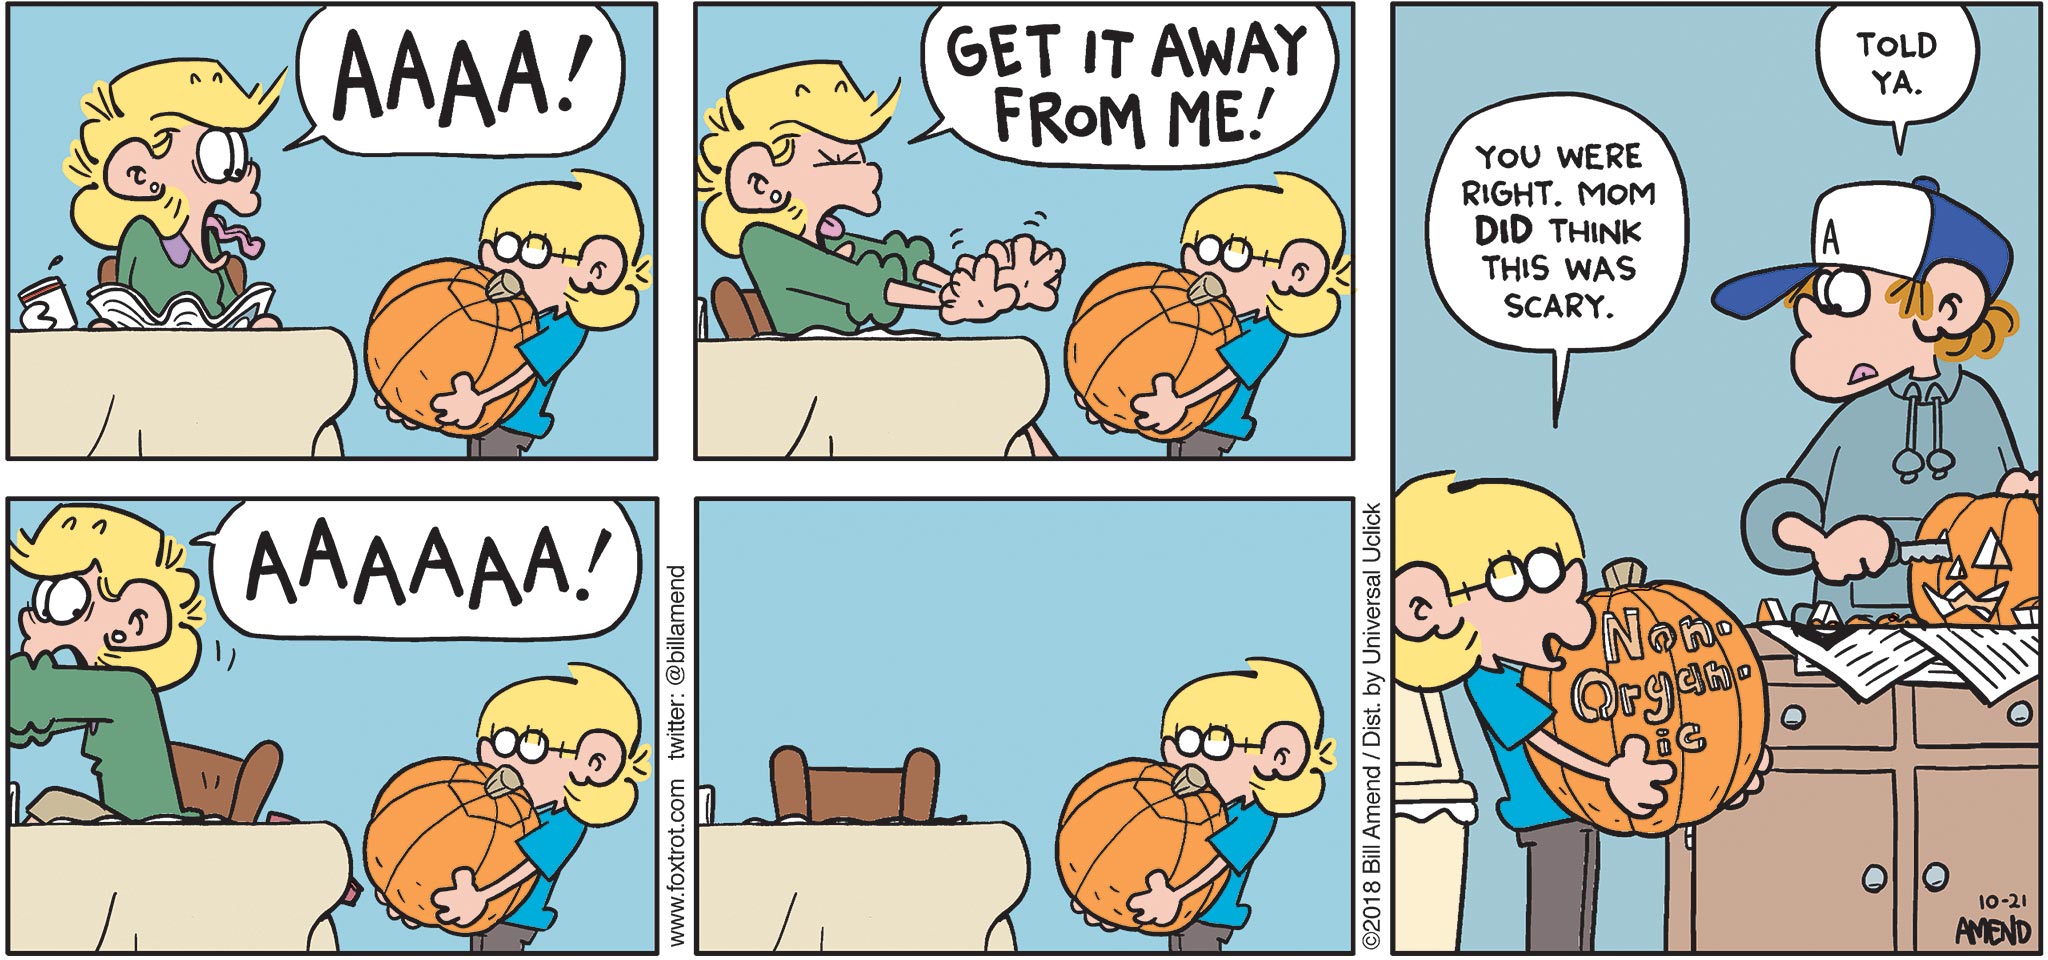 FoxTrot by Bill Amend - "Scary Pumpkin" published October 21, 2018 - Andy says: AAA! Get it away from me! AAAAA! Jason says: You were right. Mom DID think this was scary. Peter says: Told ya.